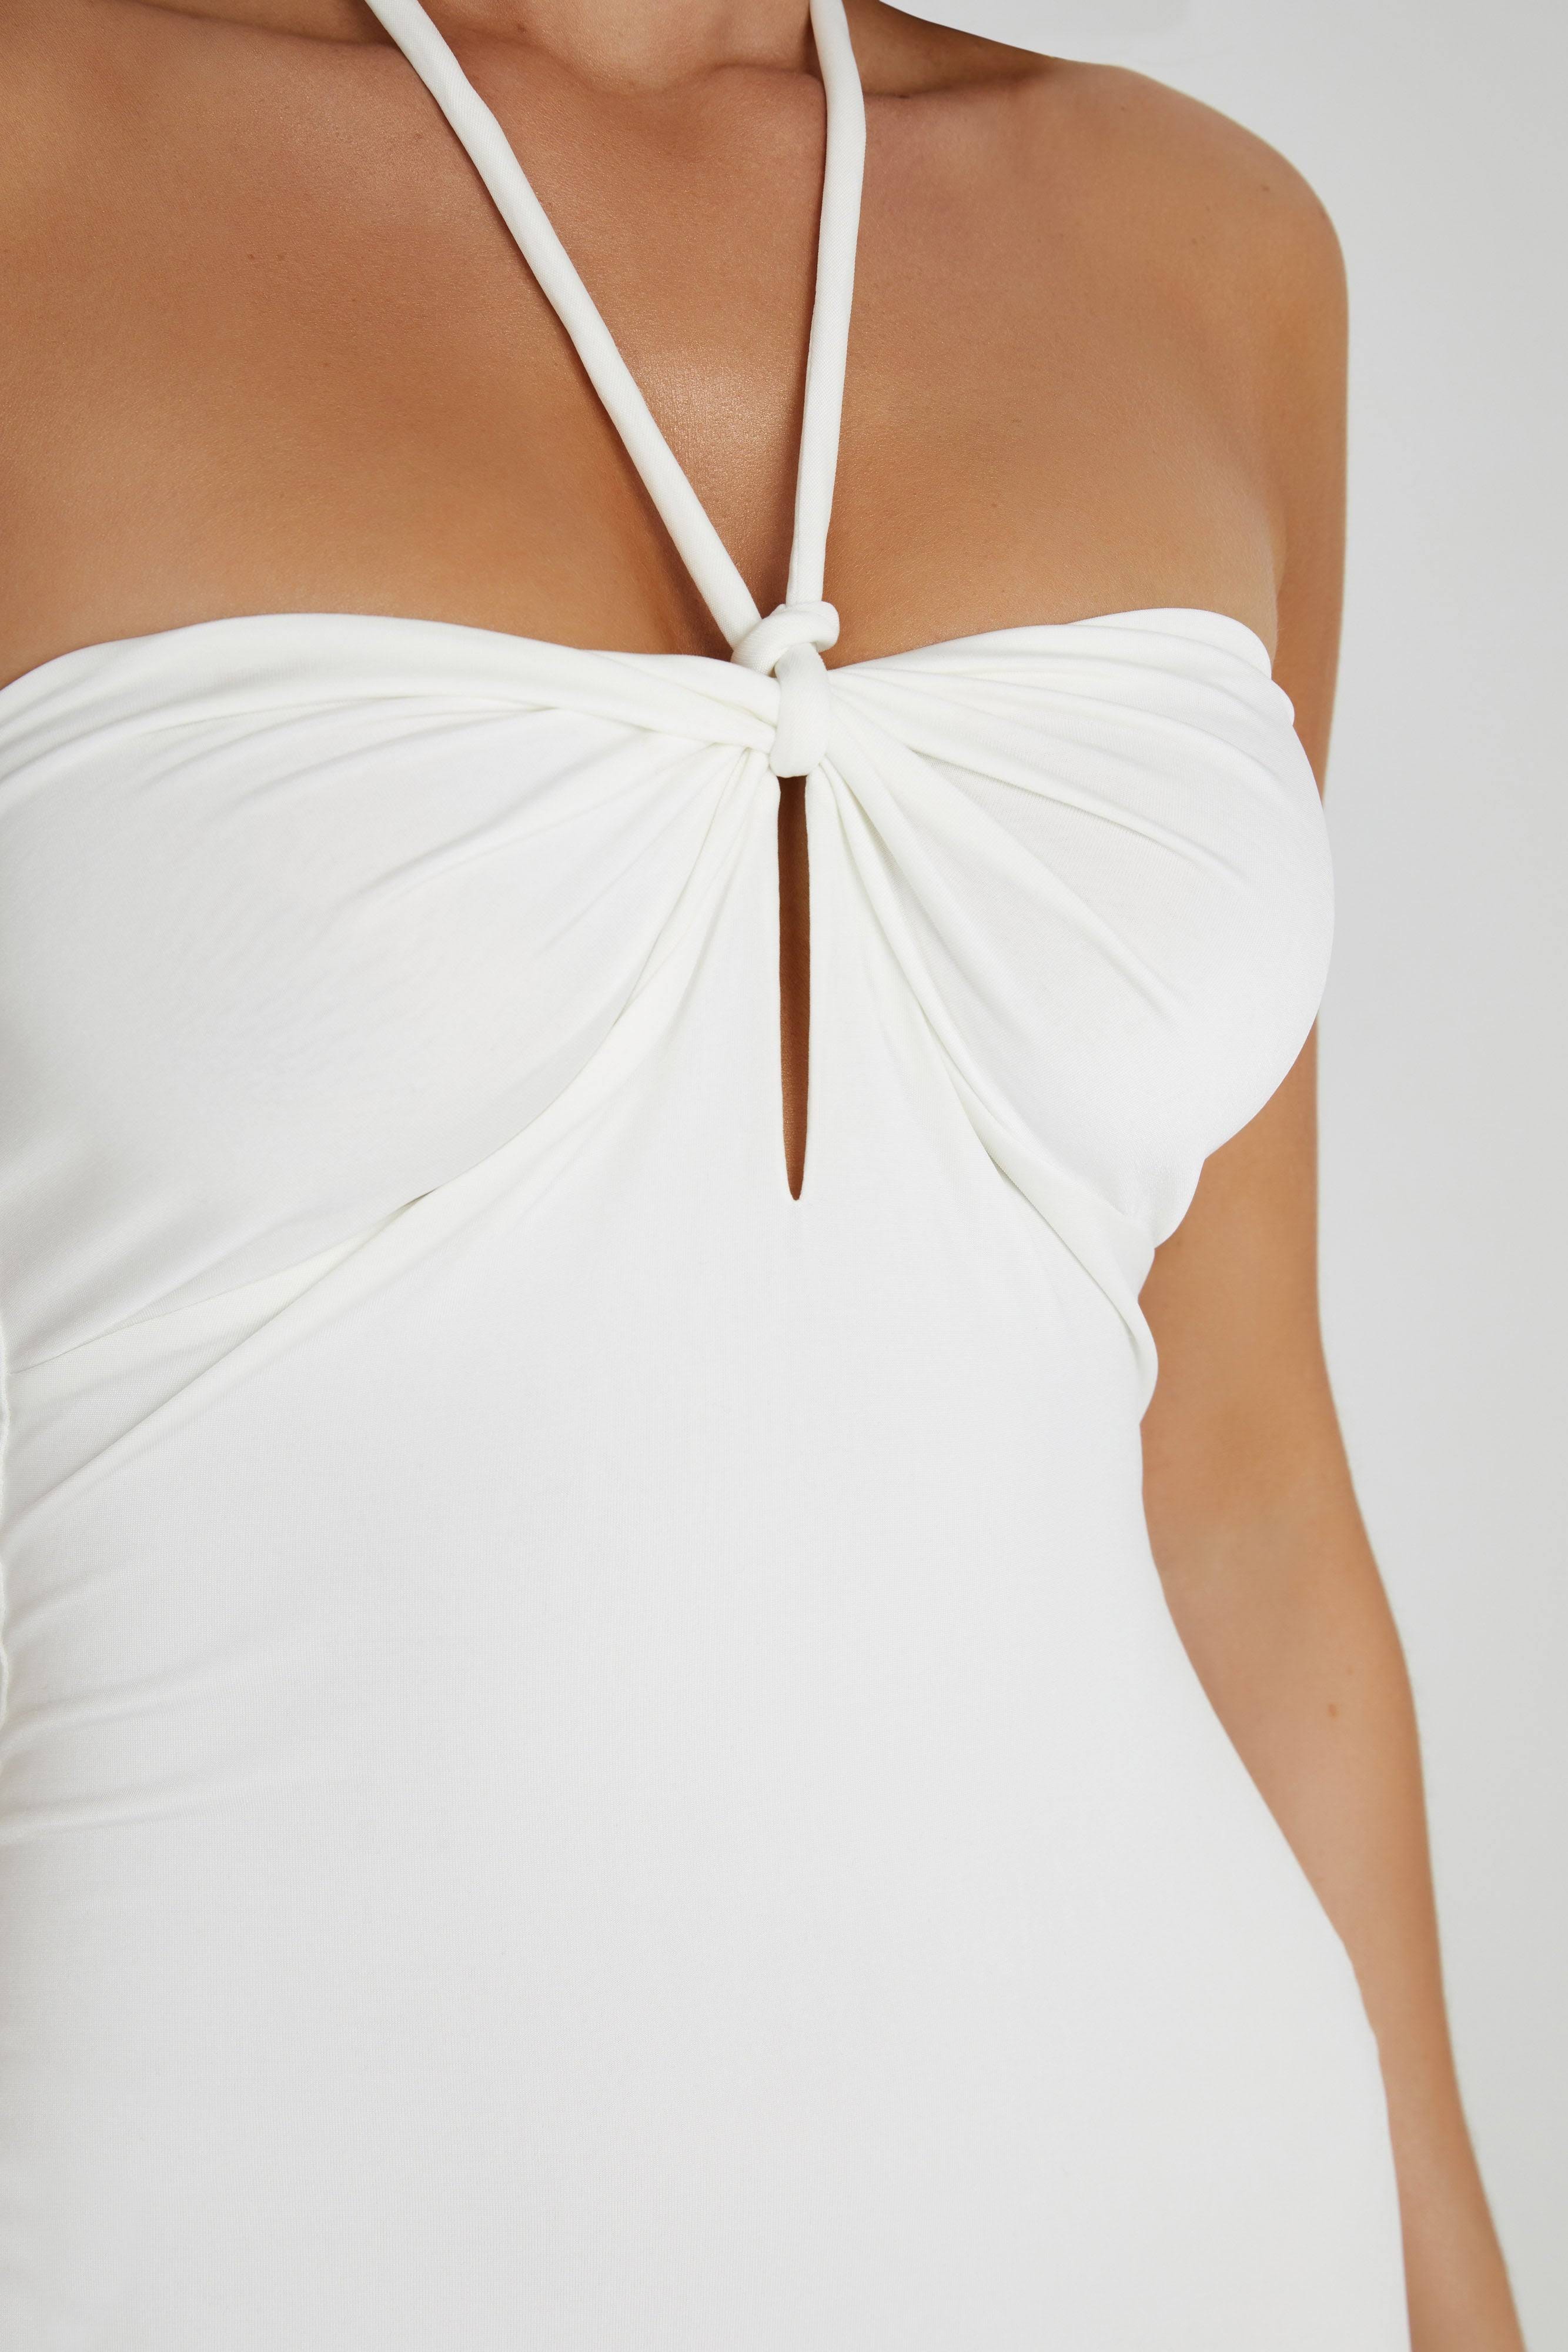 Stylish White Halter Jersey Dress for 18th Birthday Events | Image